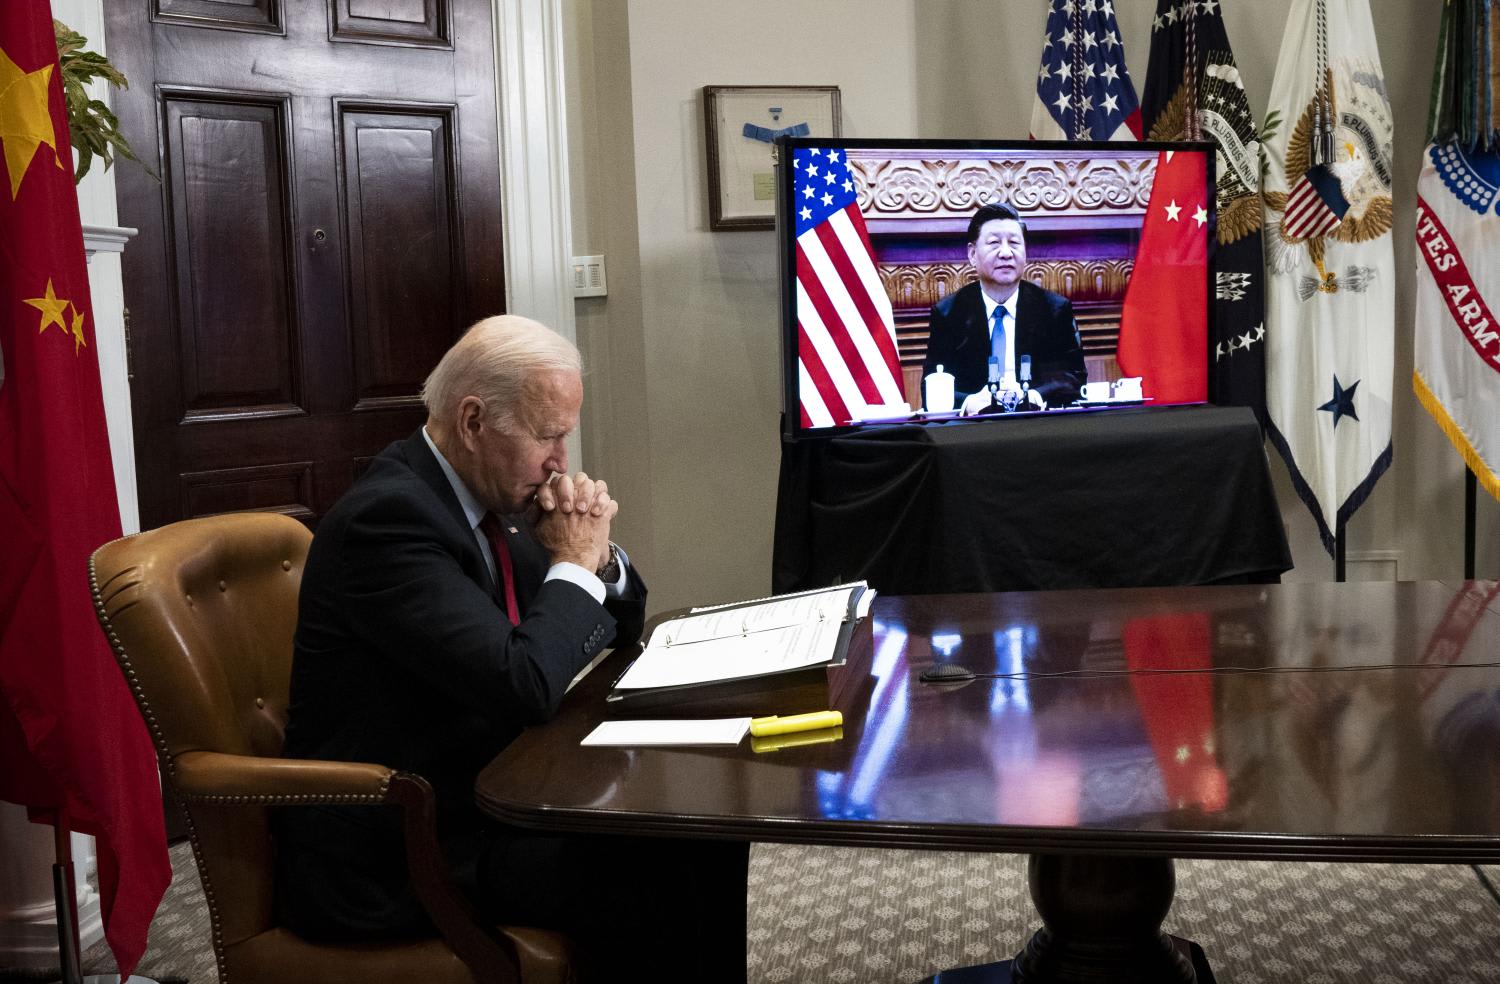 President Joe Biden during a virtual meeting with Chinese President Xi Jinping at the White House on Nov 15, 2021.